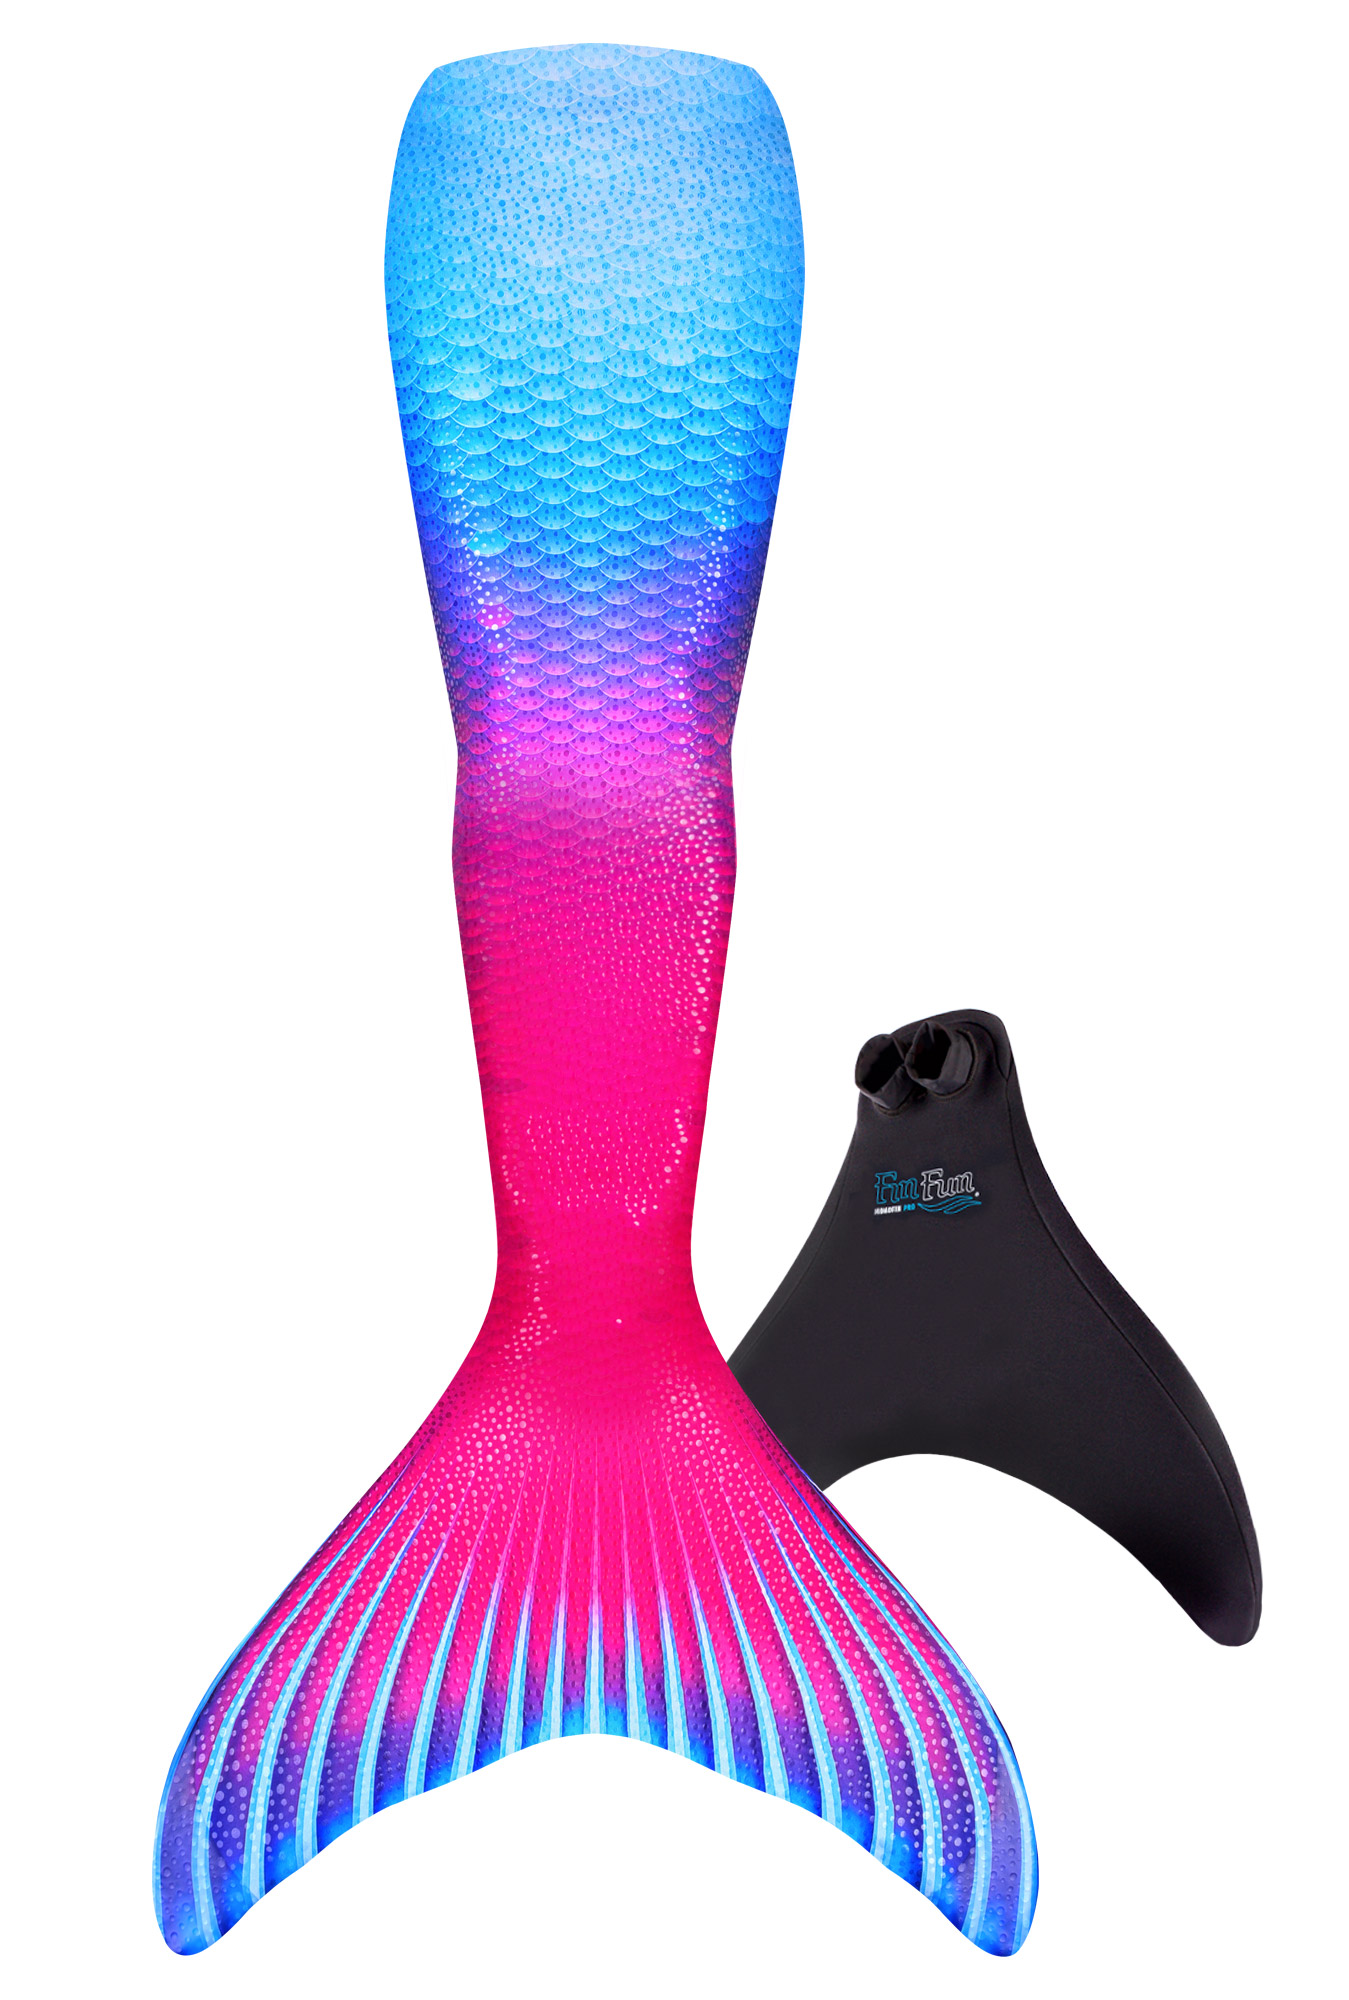 Kids Mermaid Tails for Swimming - Fin Fun Limited Edition - With